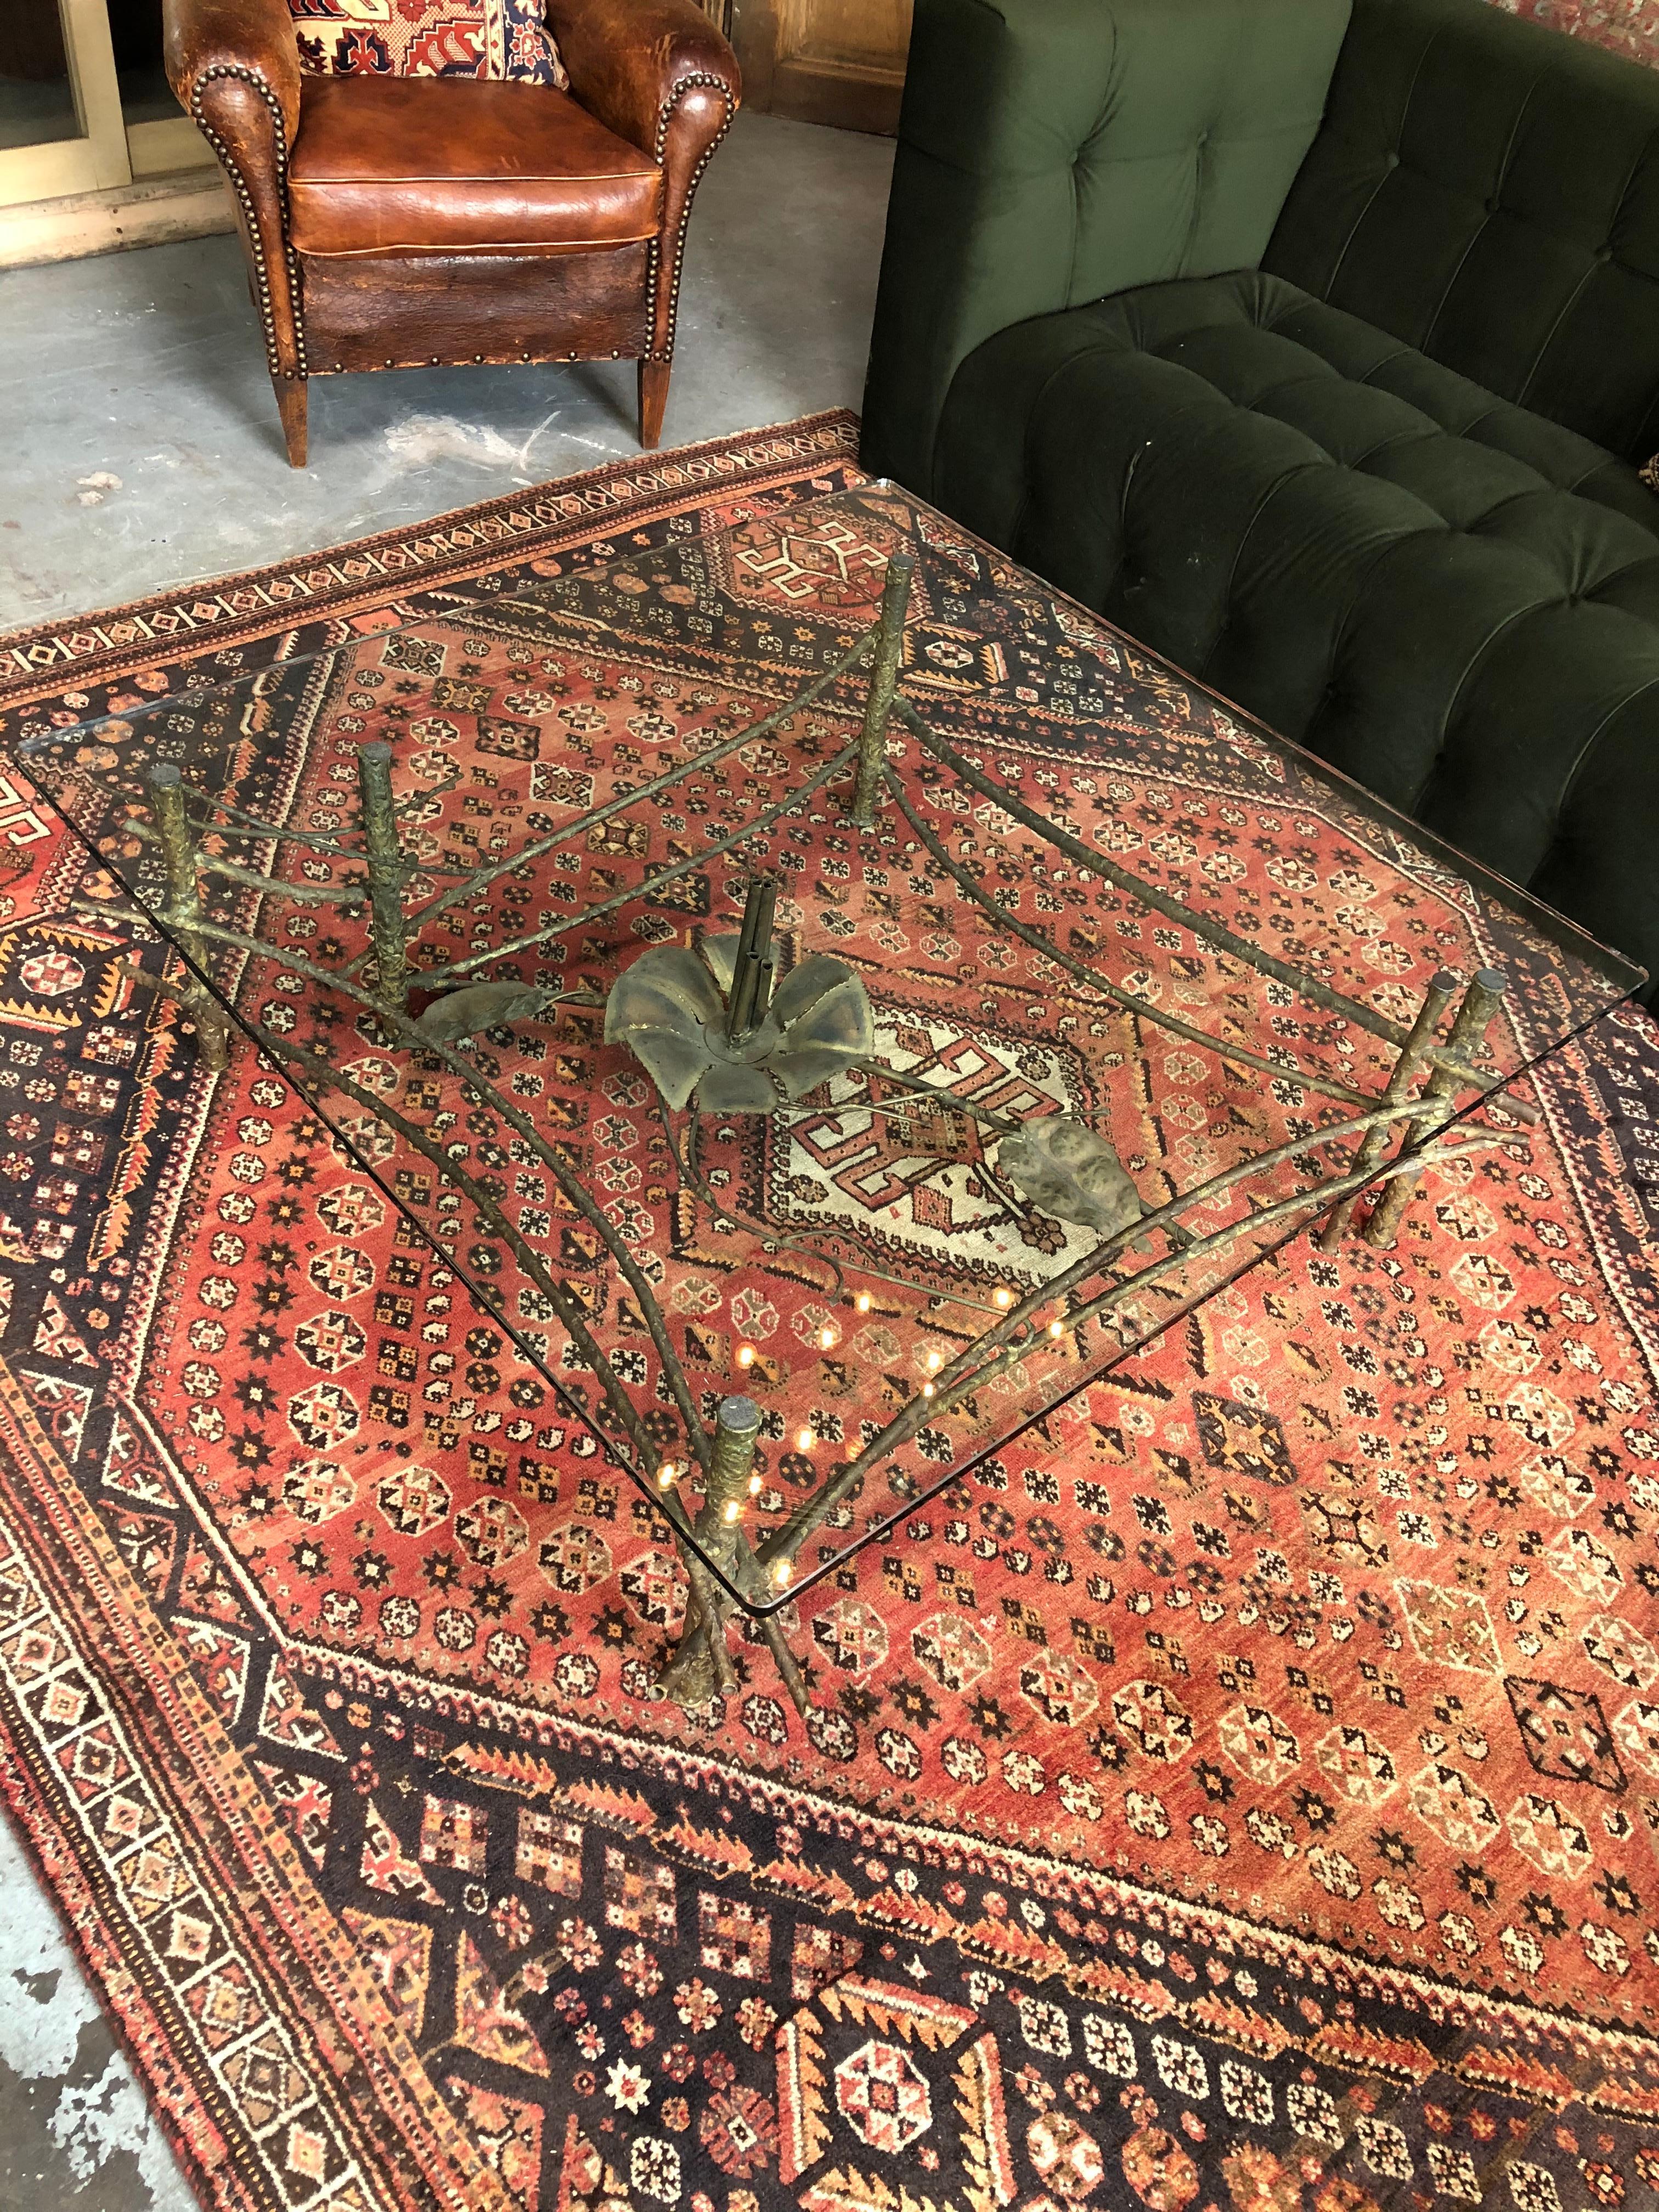 Early 1900s glass coffee table with an ornate floral iron table base. Base has a large lotus looking flower at the center. Glass evenly sits on all four corners with pads on each leg as to not scratch the tabletop.
 